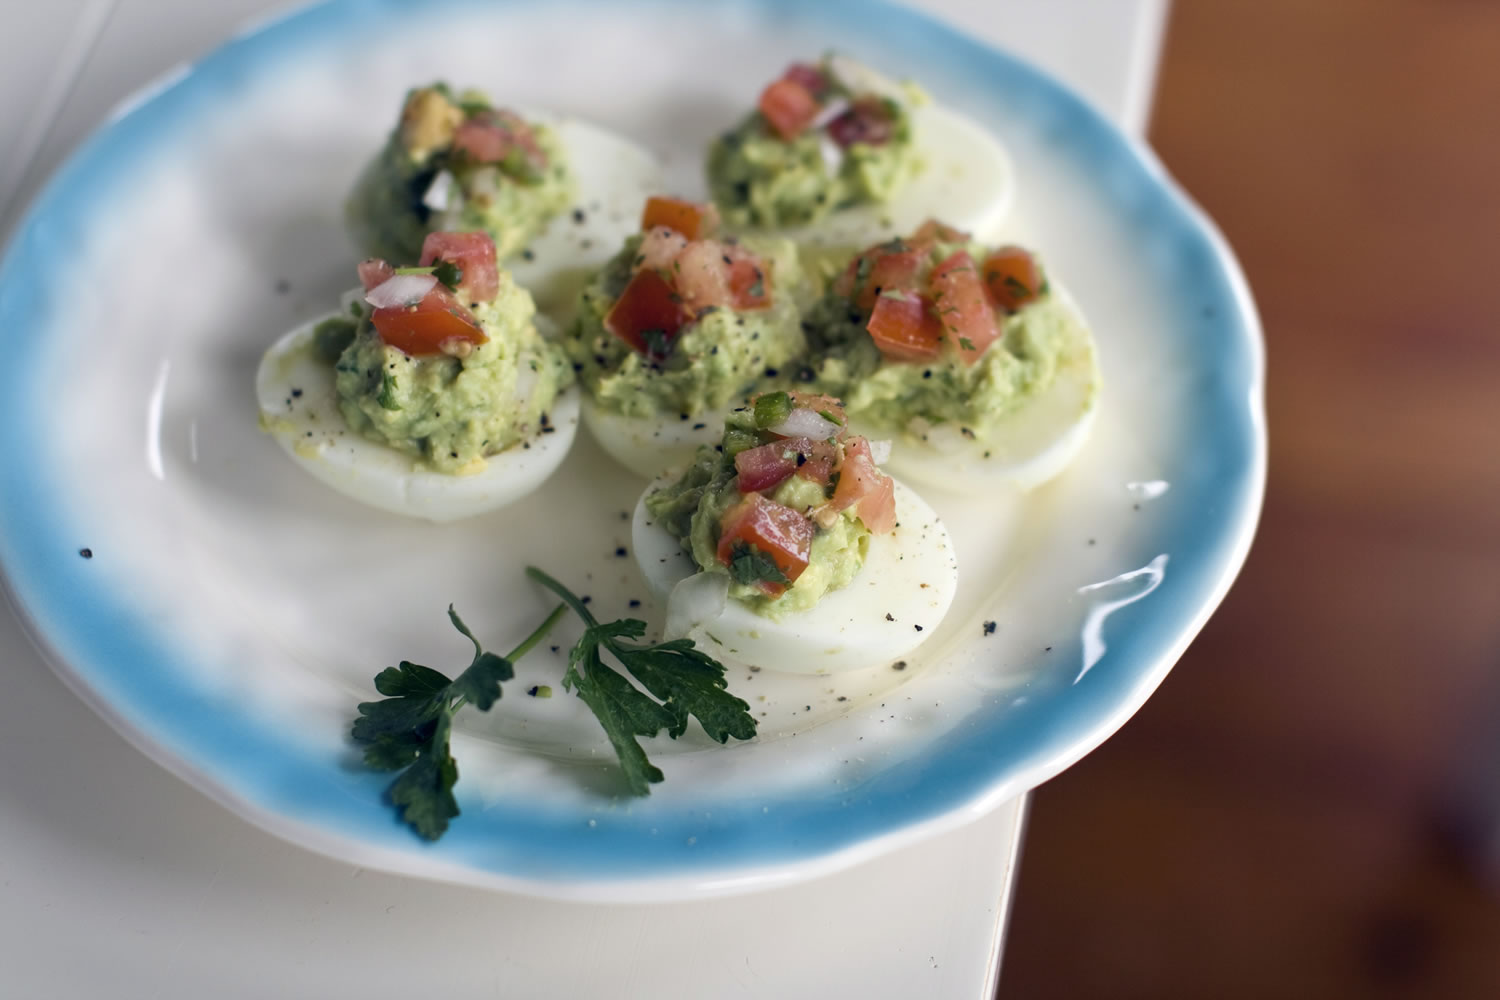 Mexican-style Stuffed Eggs have a little more zip than your typical deviled eggs.